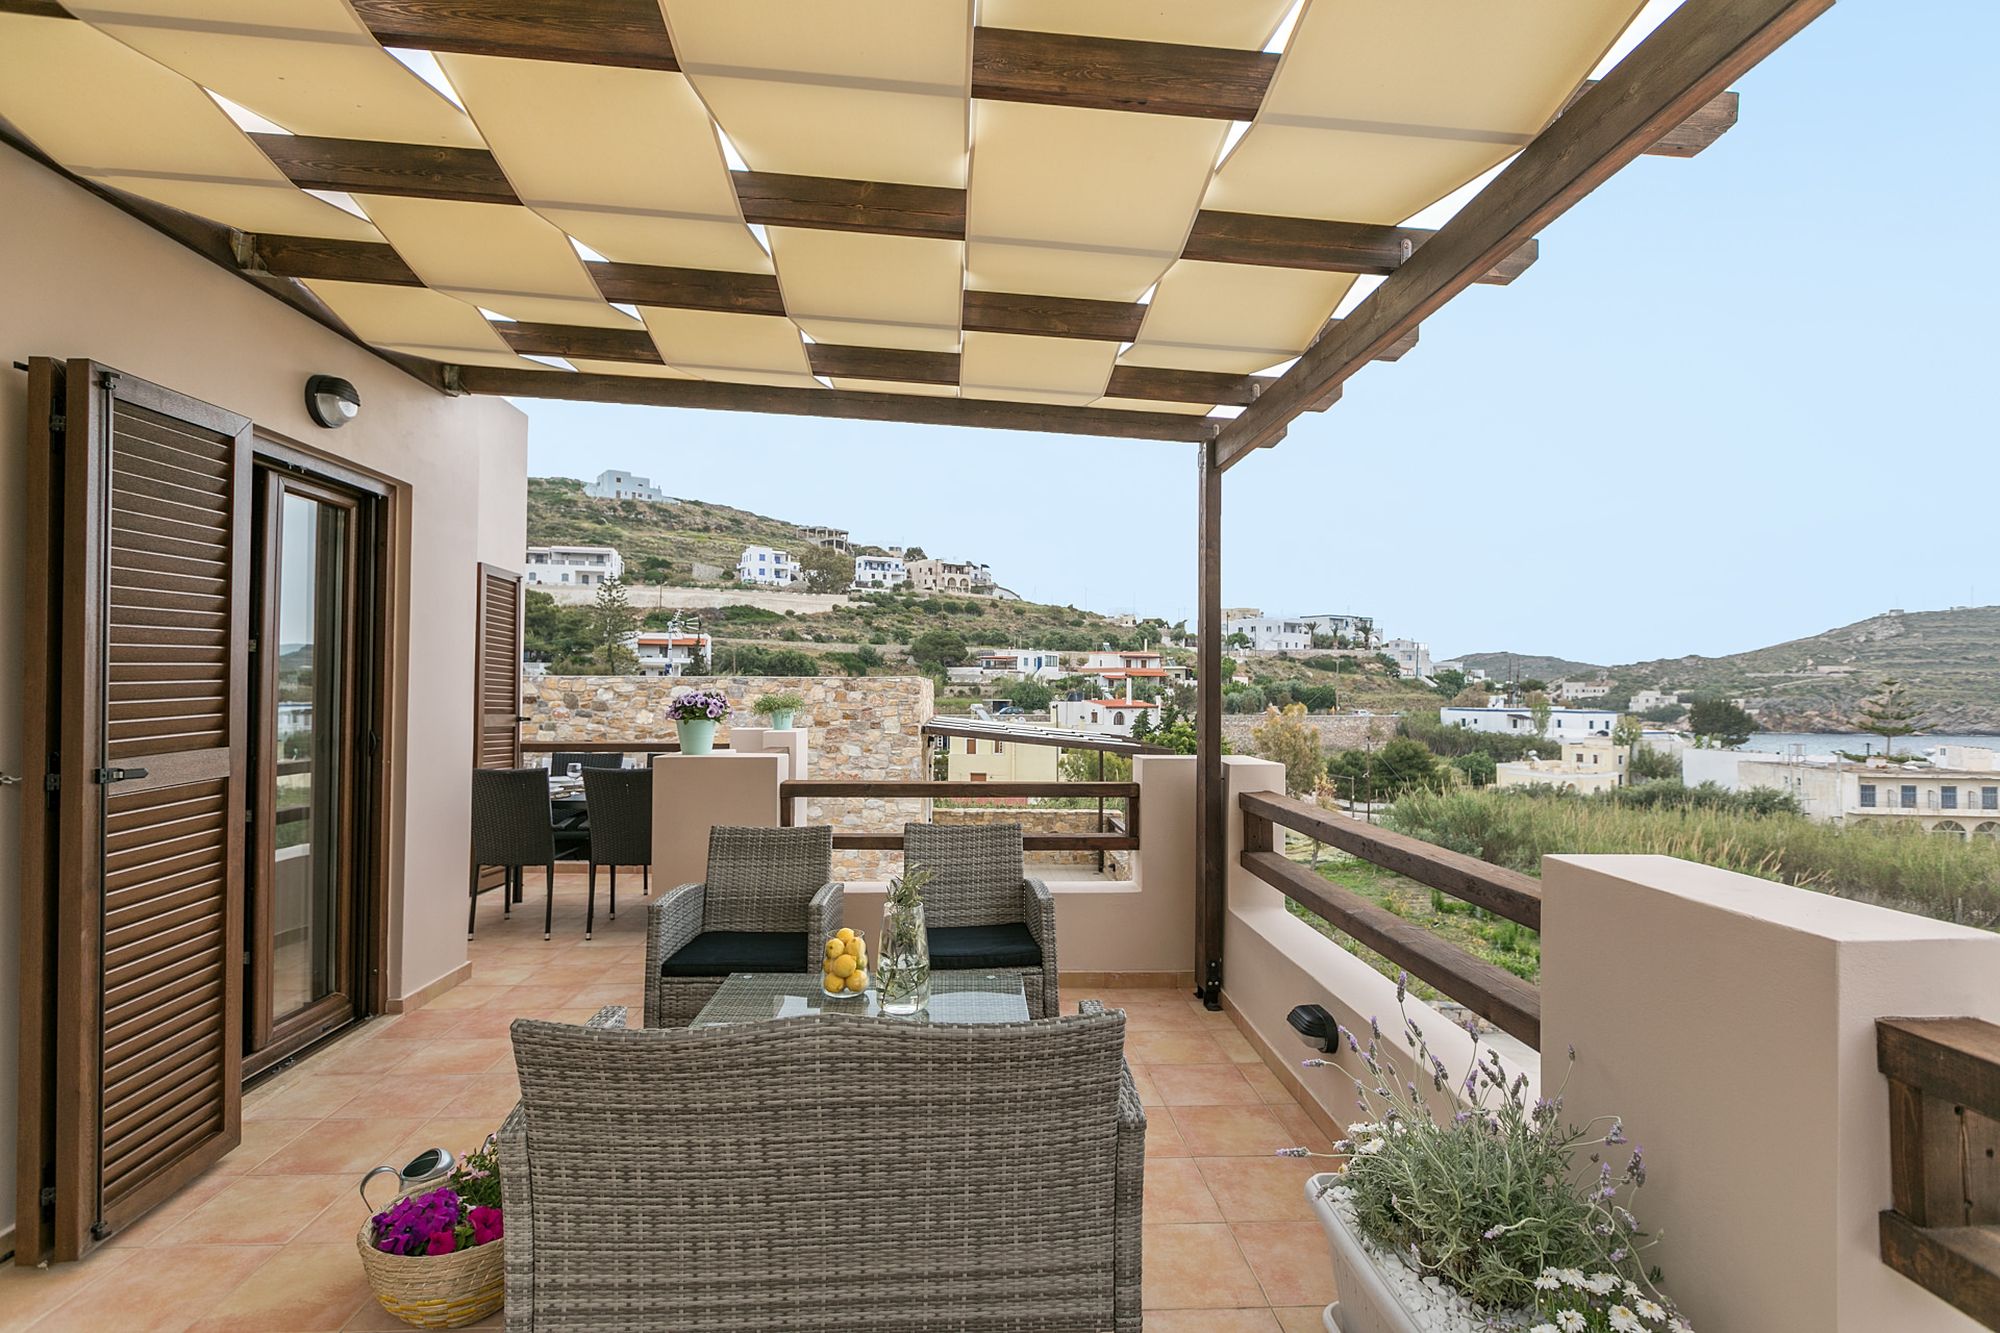 Veranda with pergola, fully furnished with a lounge, a dining table and beautiful flowerpots.